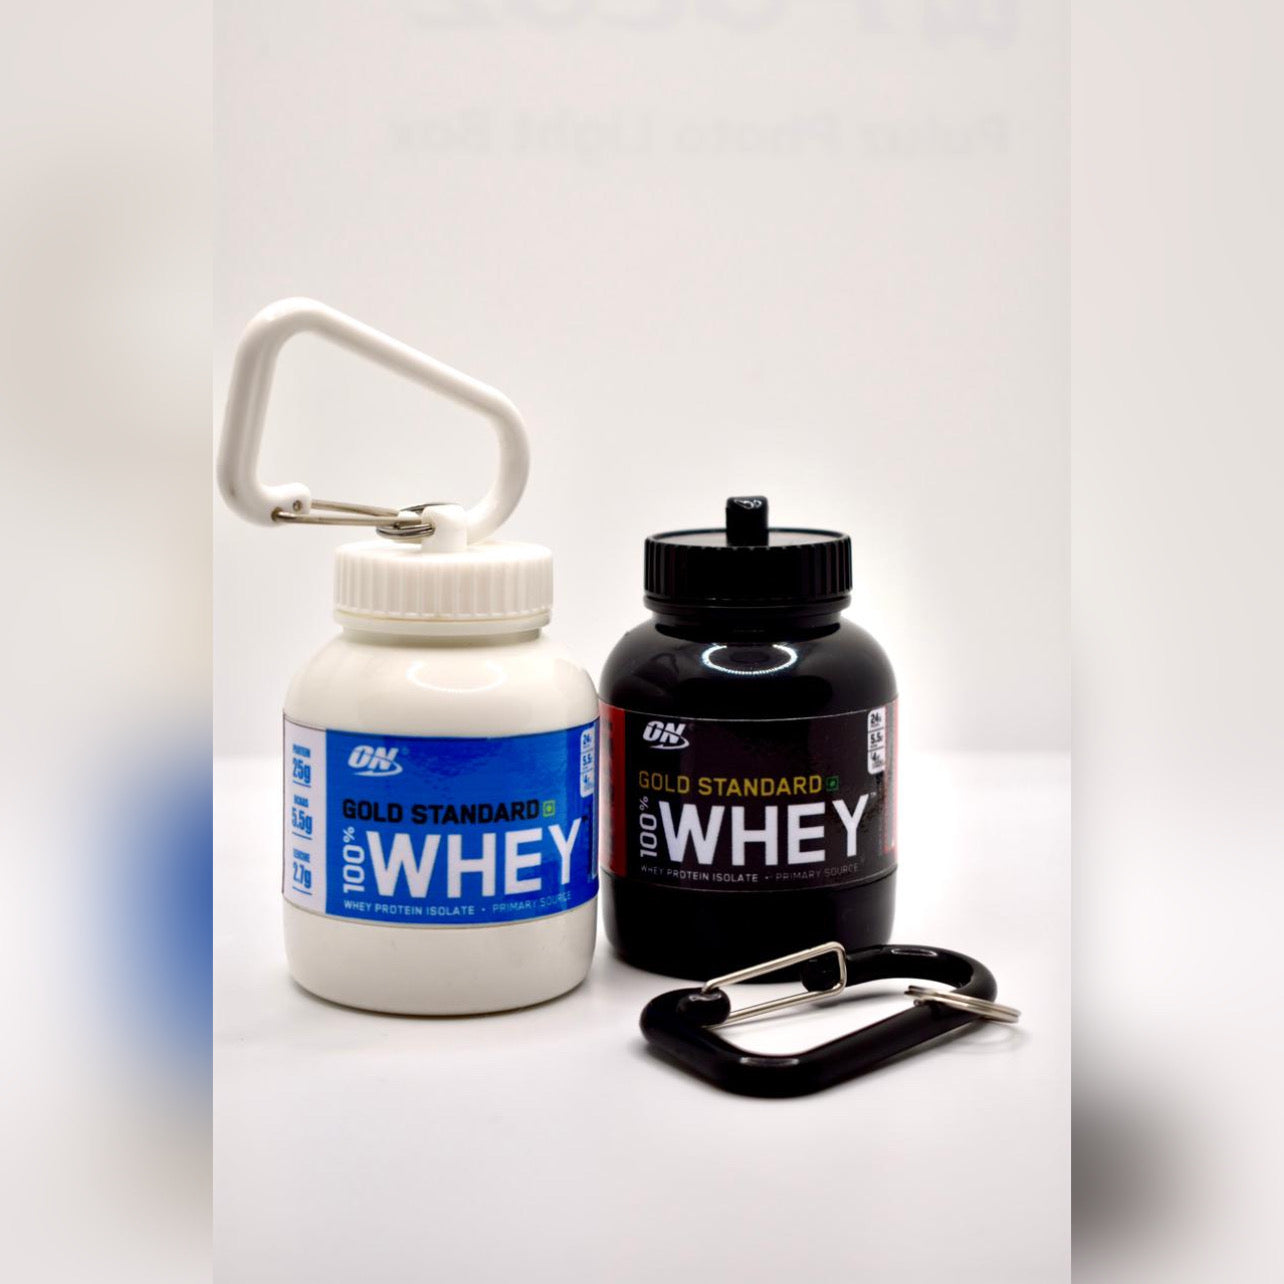 (PACK OF 2 Black+White) Portable Supplement Powder Carrying Whey Protein Funnel and Container with Key-Chain